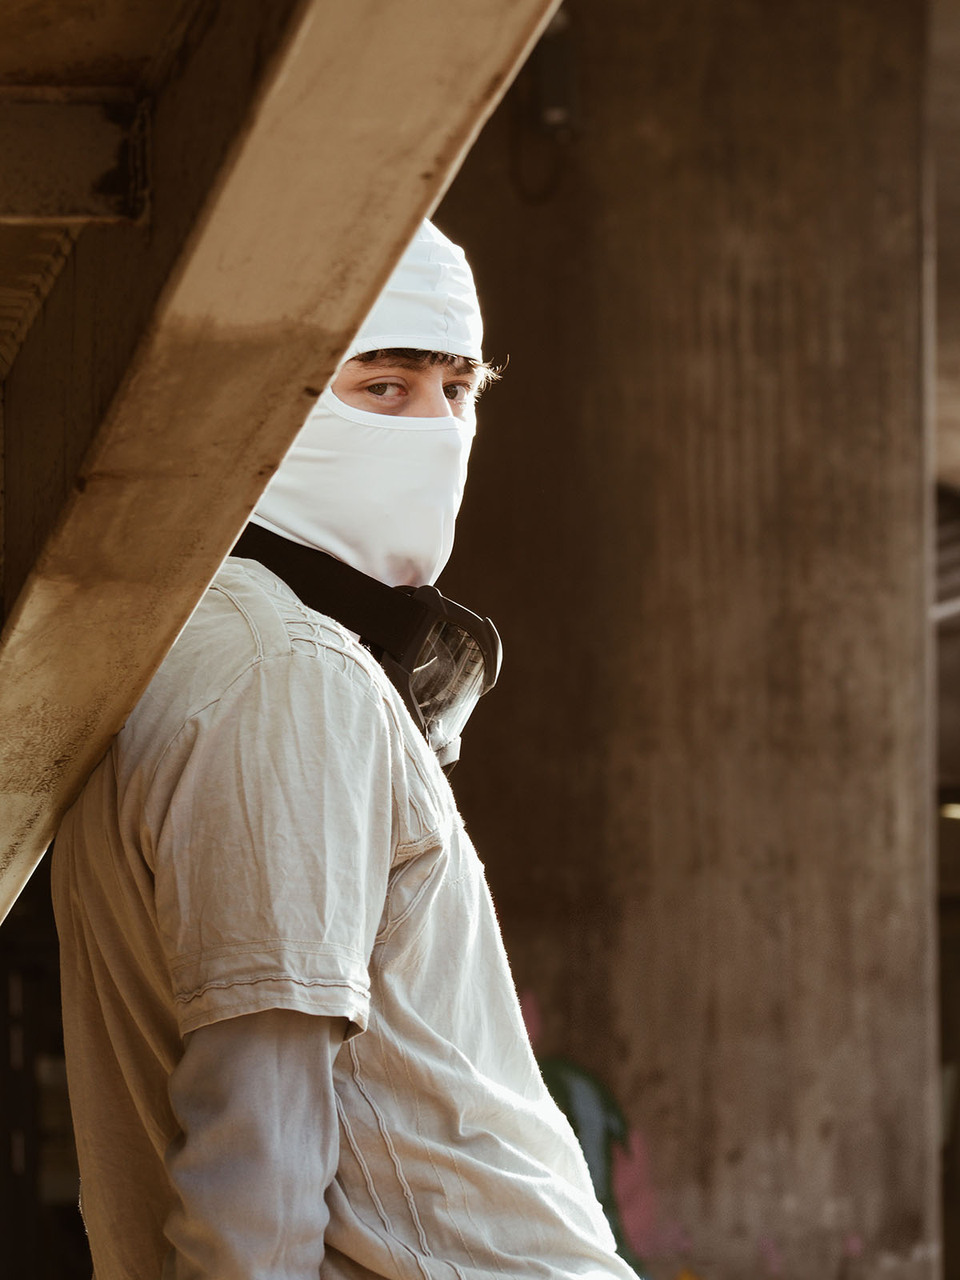 Man in white balaclava with protective goggles hanging around his neck leans against a roof beam